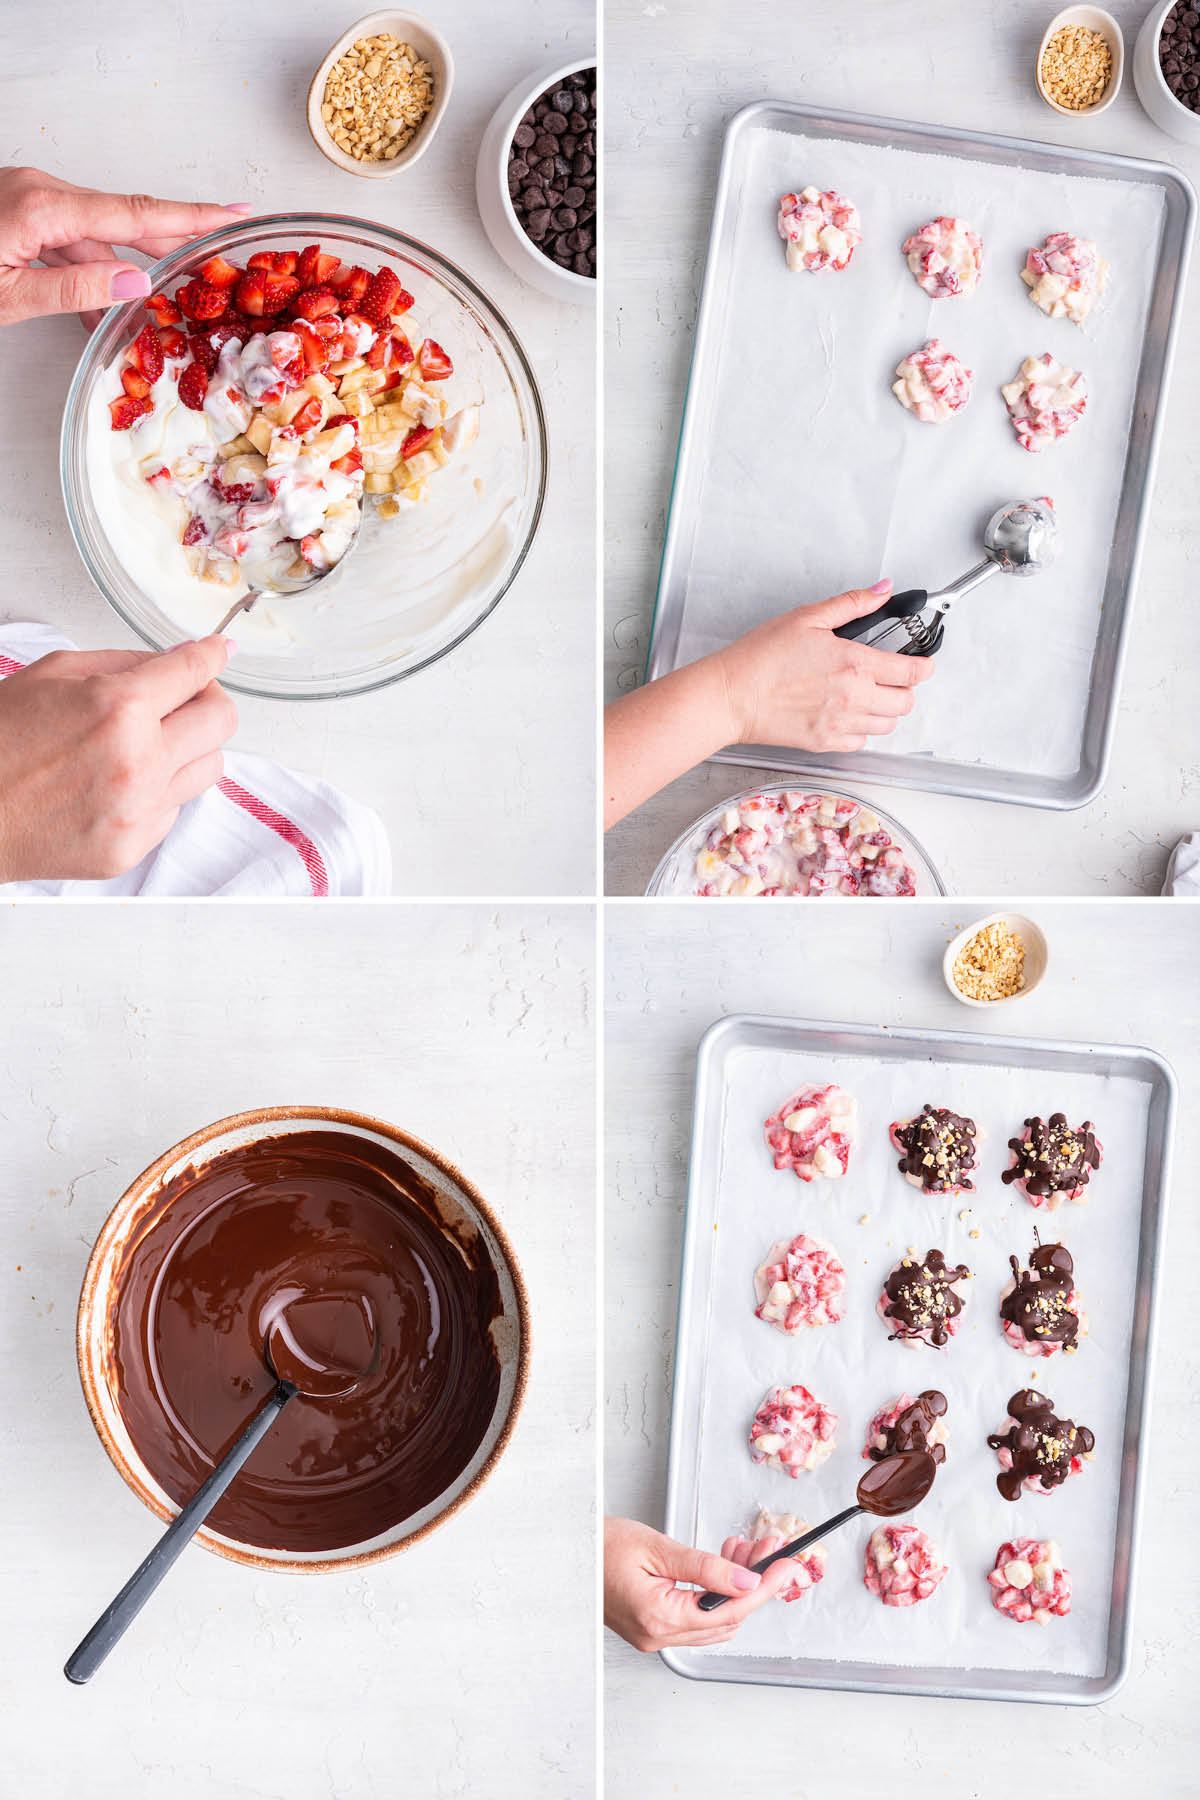 Collage of four photos showing the steps to make Chocolate Strawberry Banana Yogurt Clusters: scooping the strawberry banana mixture onto a cookie sheet and topping with melted chocolate and peanuts.